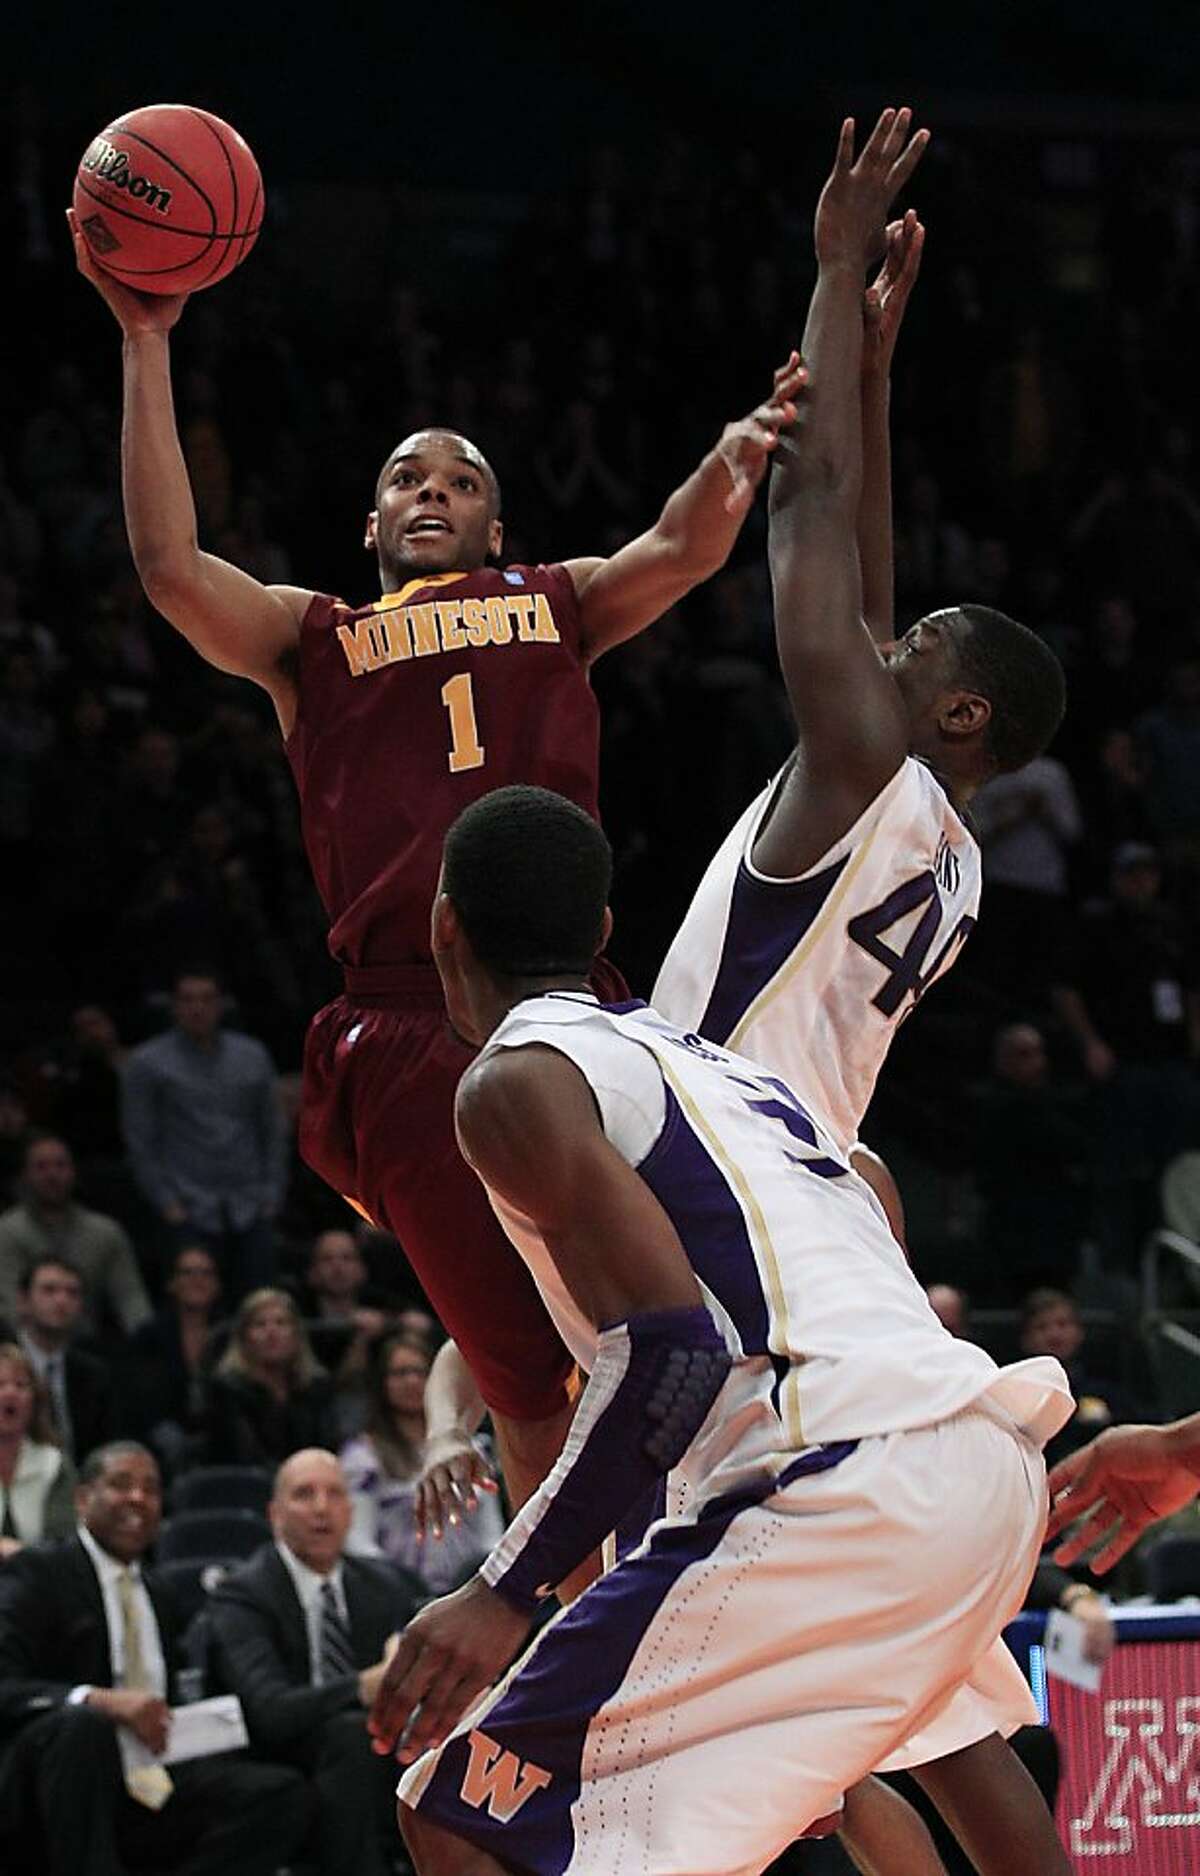 Minnesota's Andre Hollins (1) shoots over Washington's Darnell Gant during the overtime period of an NIT college basketball tournament semifinal game, Tuesday March 27, 2012, in New York. Minnesota won the game 68-67.(AP Photo/Frank Franklin II)